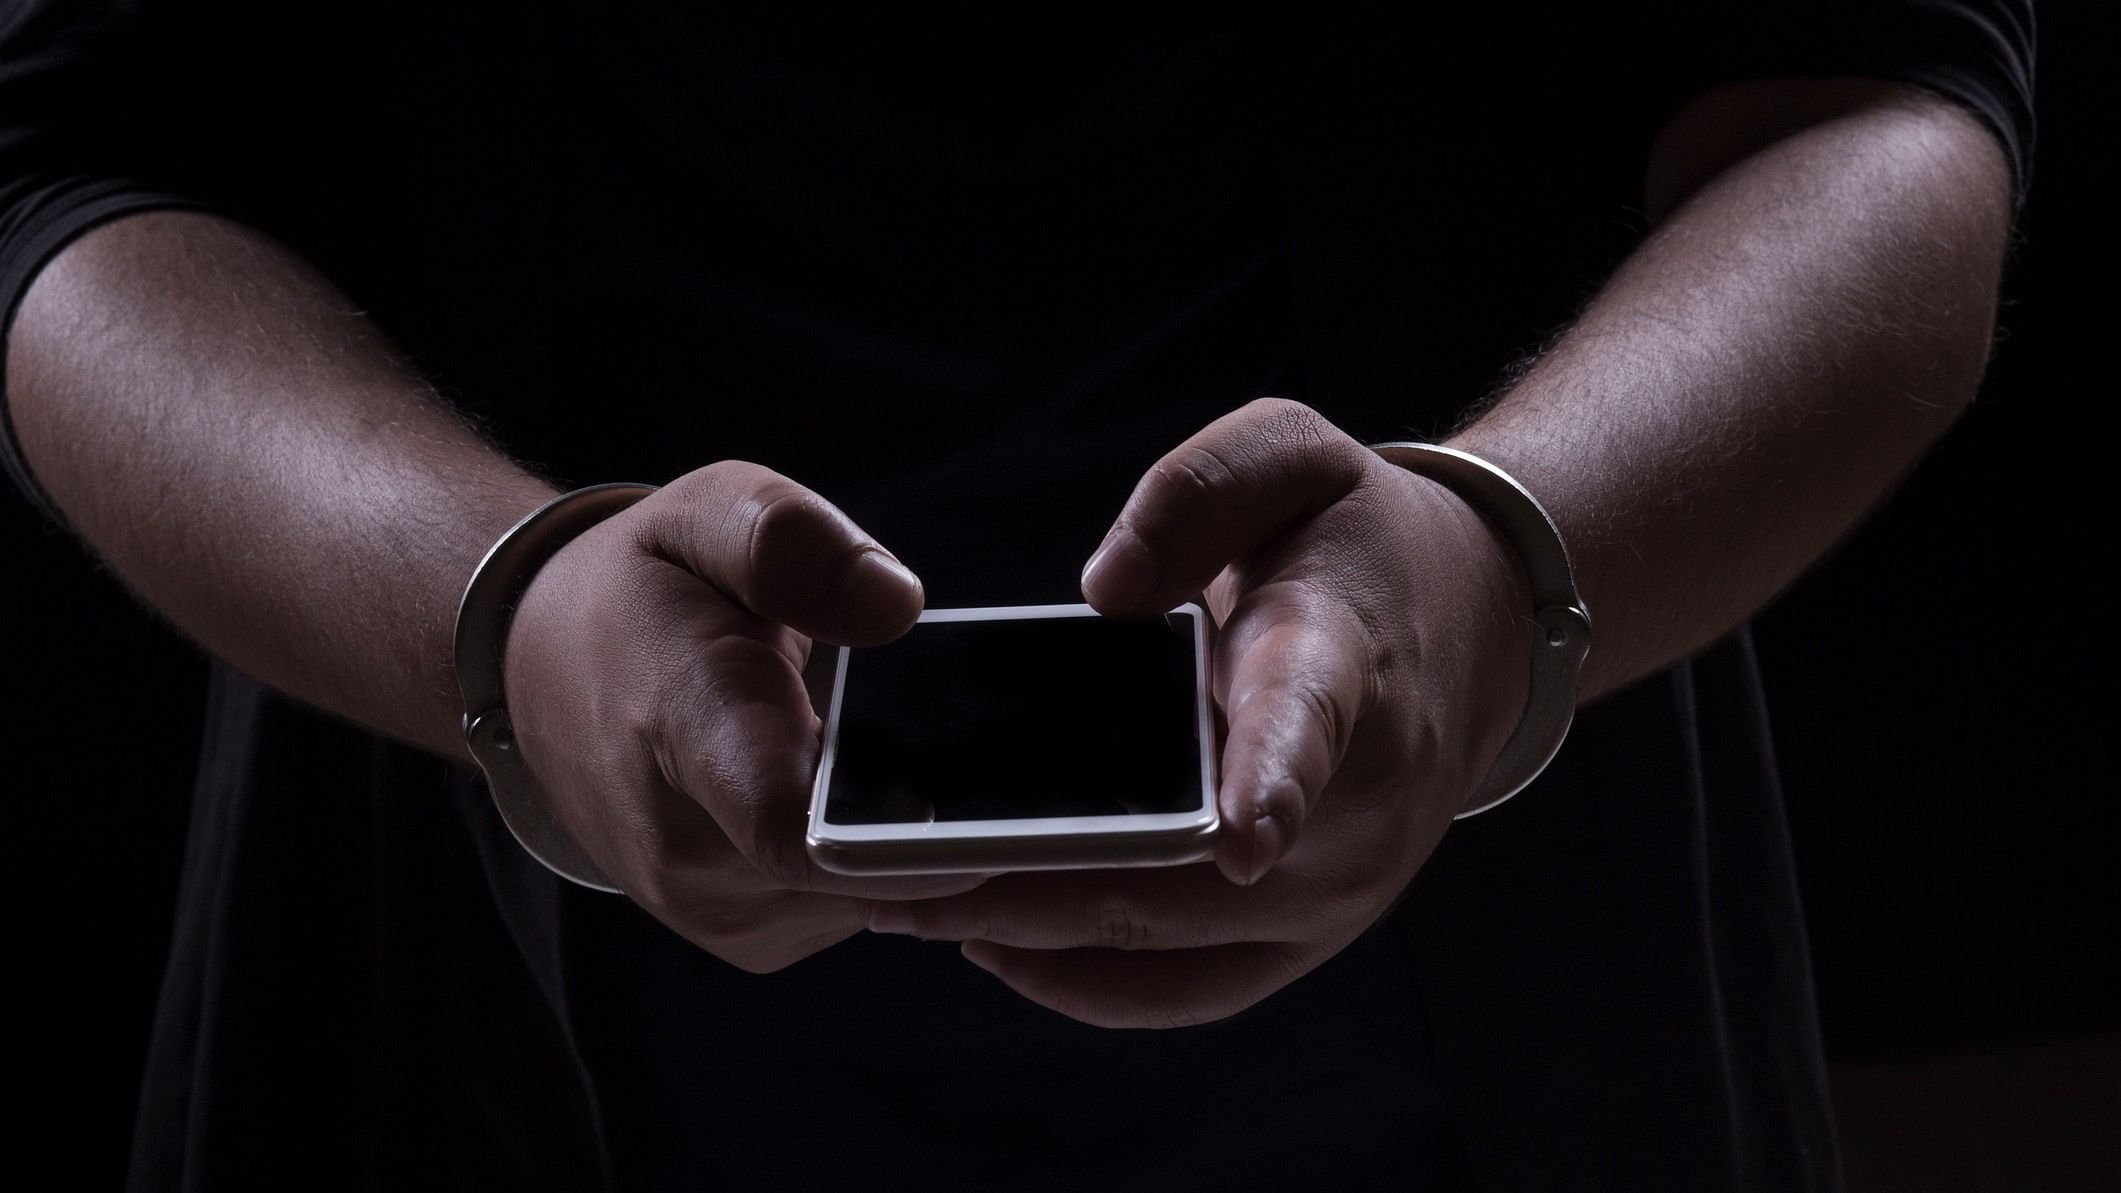 <div class="paragraphs"><p>Representative image showing a man in cuffs with a phone in his hand.</p></div>